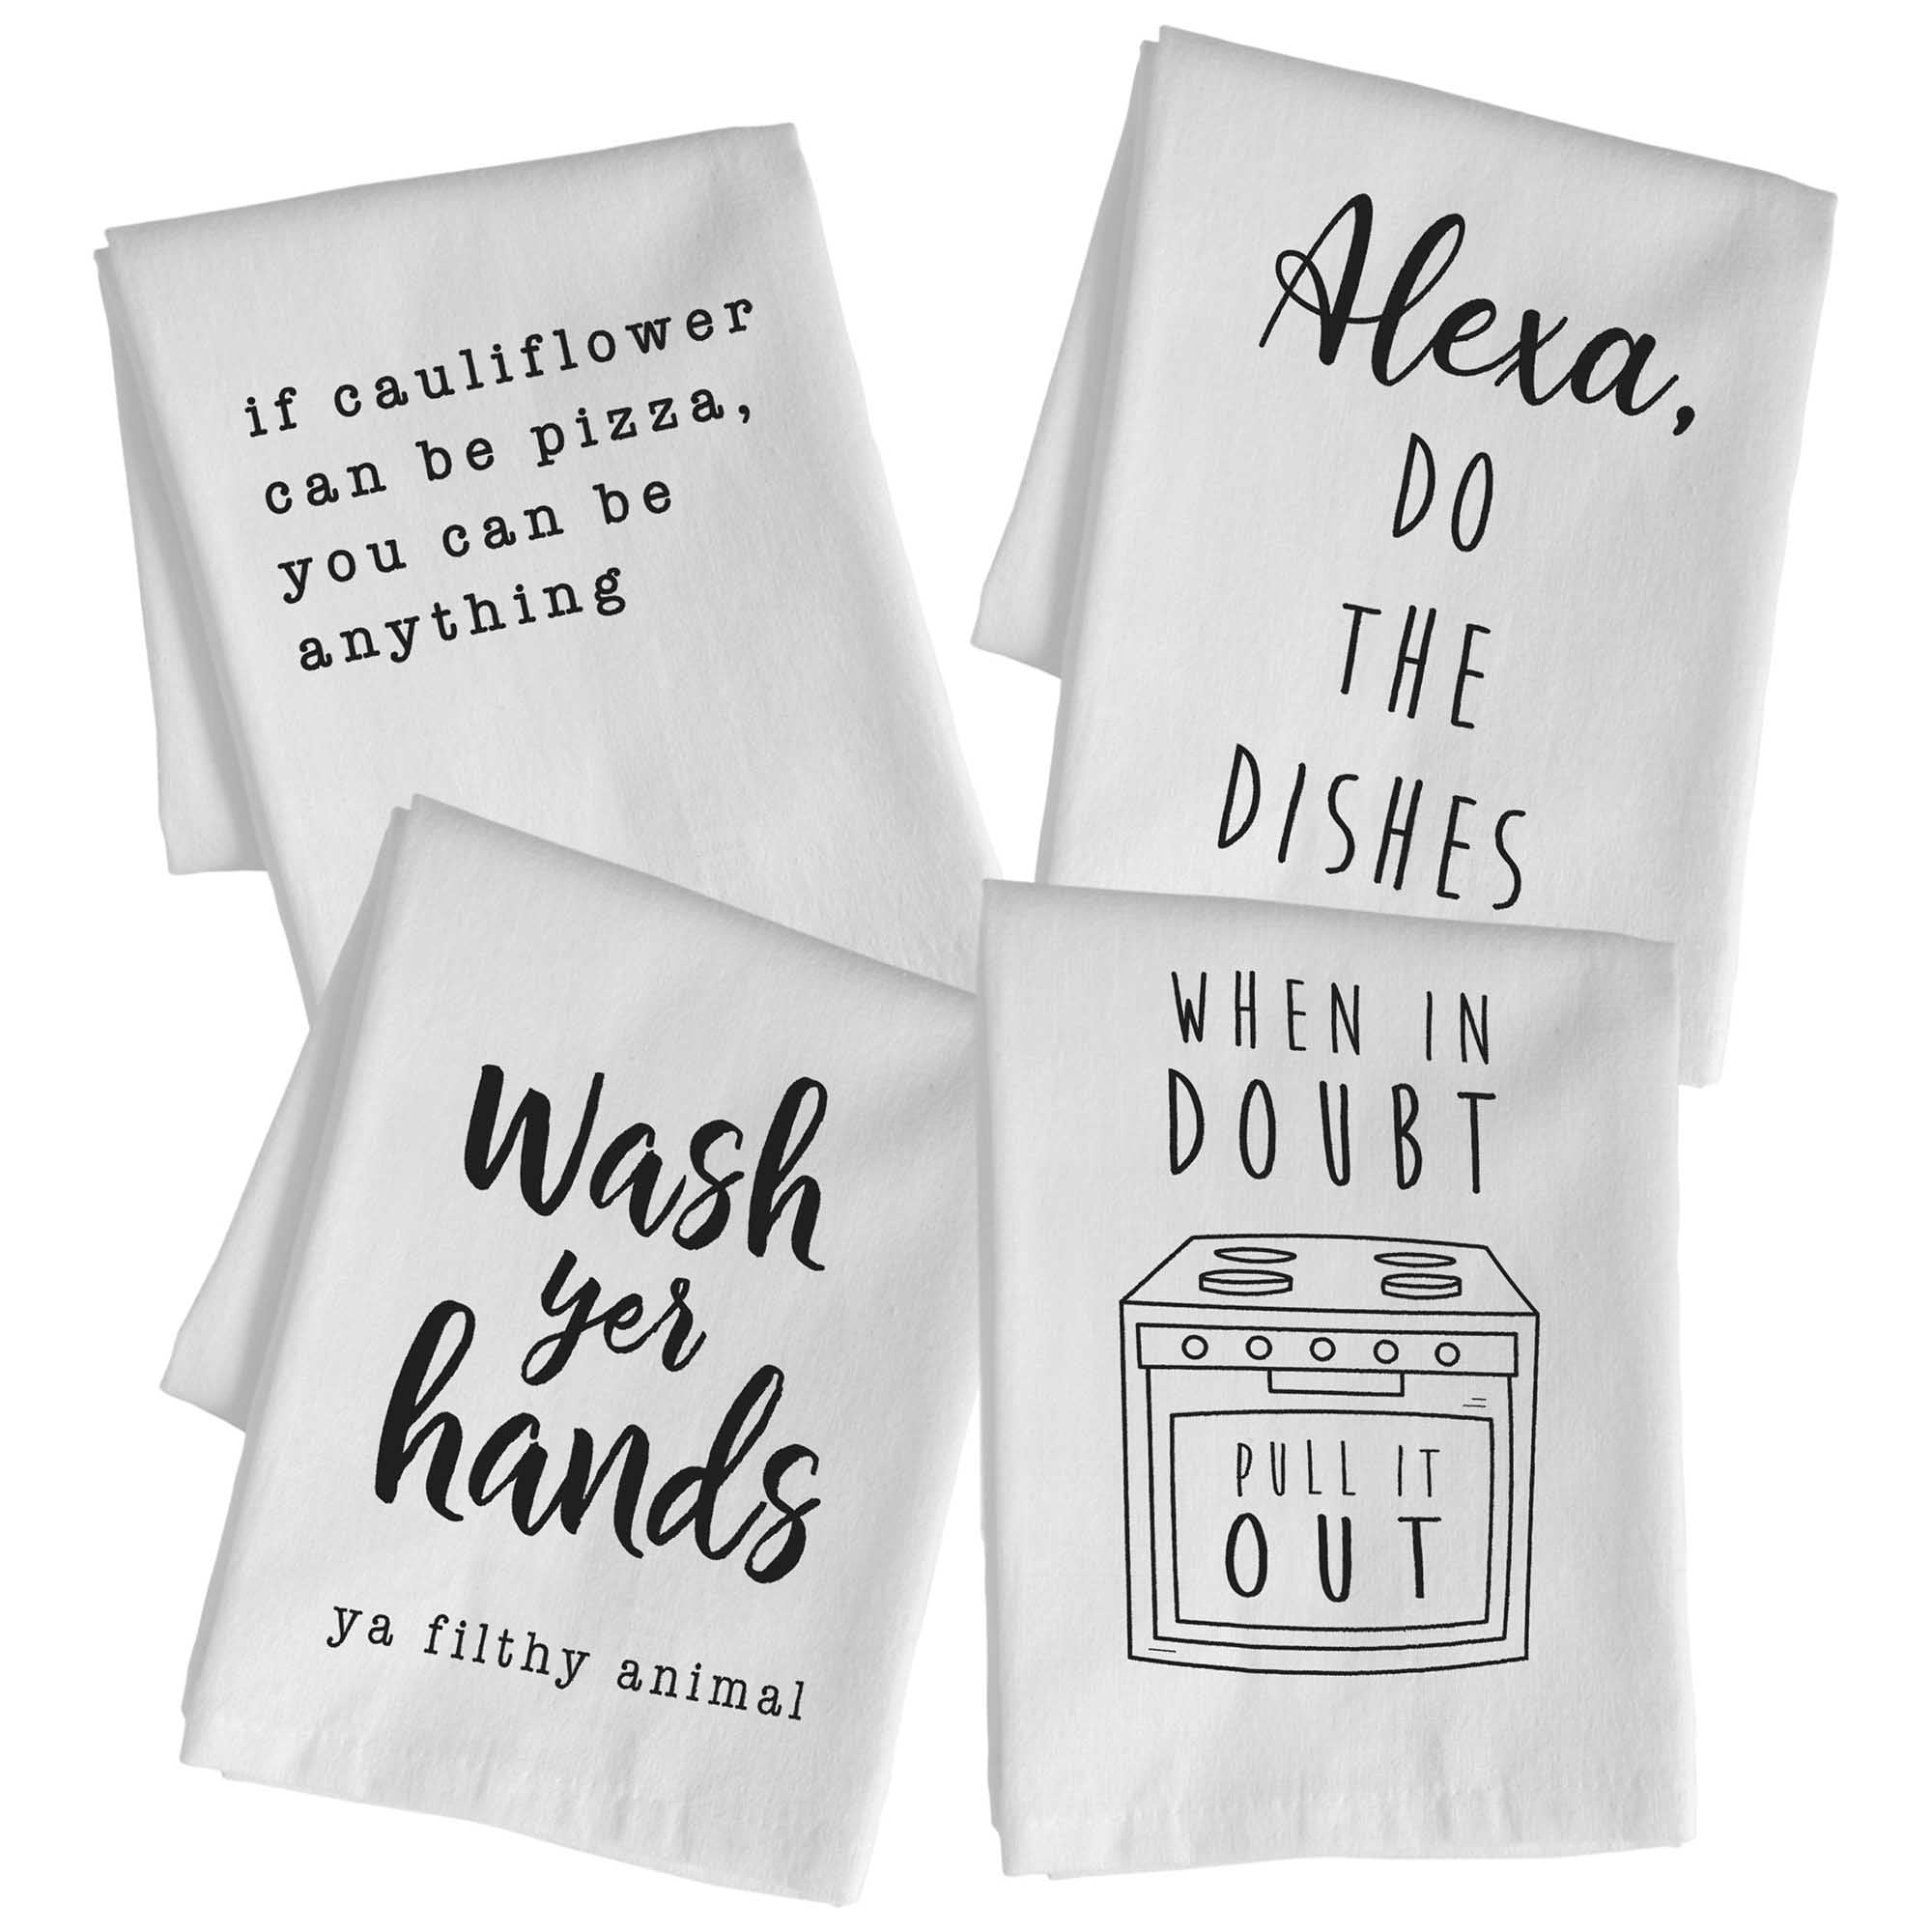 Patelai 4 Pieces Funny Kitchen Towels Dish Towels with Funny Saying Cute  Decorative Dishcloths Sets Fun Dish Towels for Housewarming Present Home